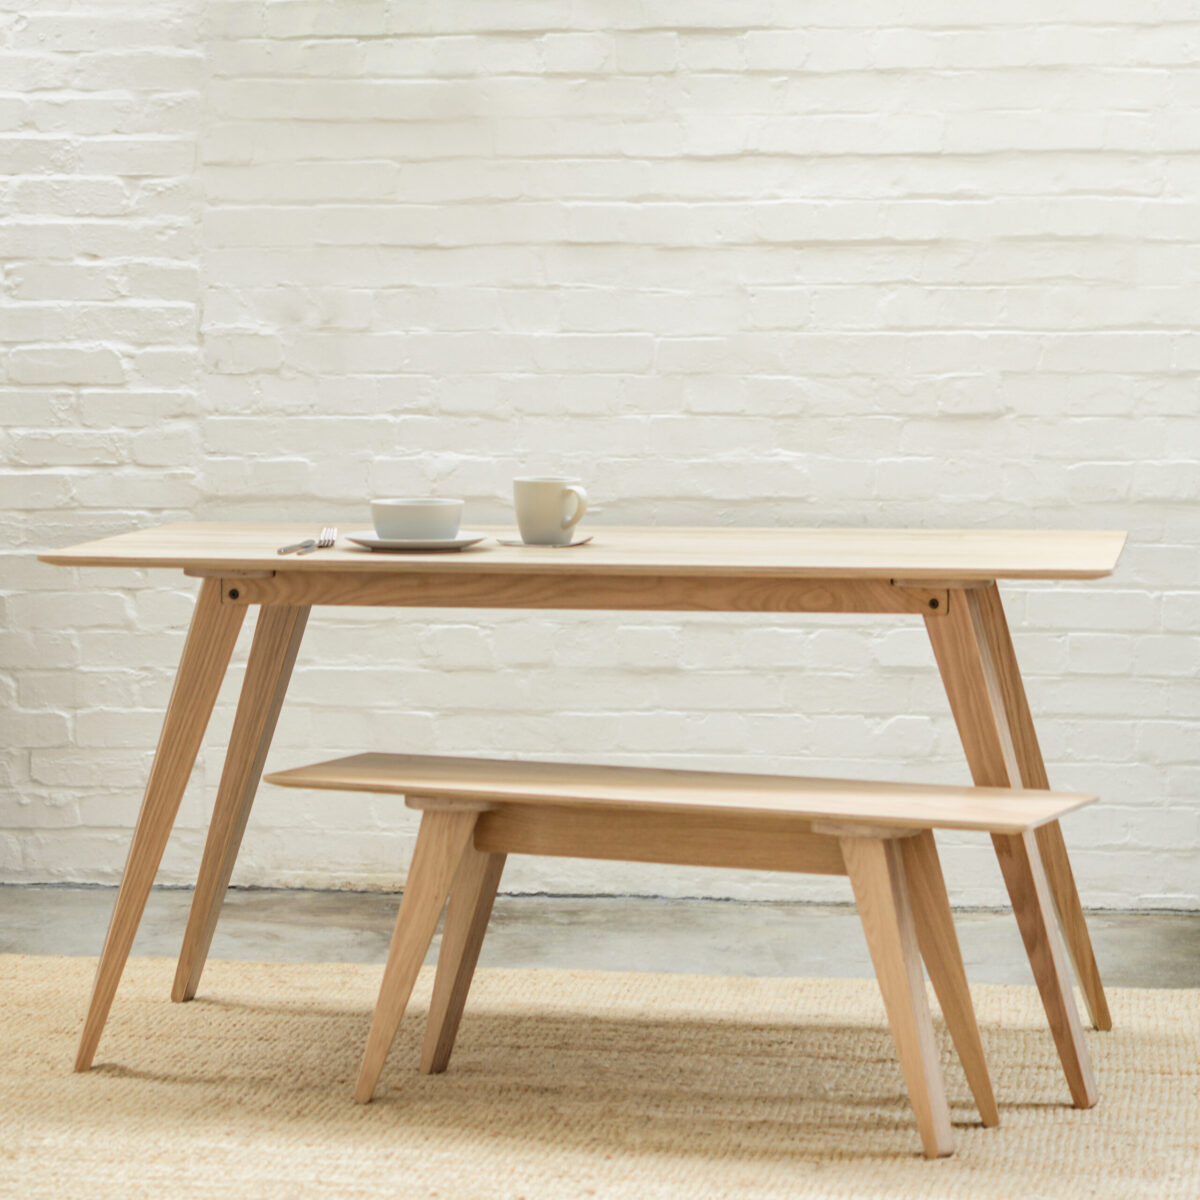 A modern, Scandinavian inspired Brenin Bench Seat and Brenin Dining Table made from Birch plywood with natural wood veneer sit in perfect harmony; ready for a relaxed Sunday morning breakfast.